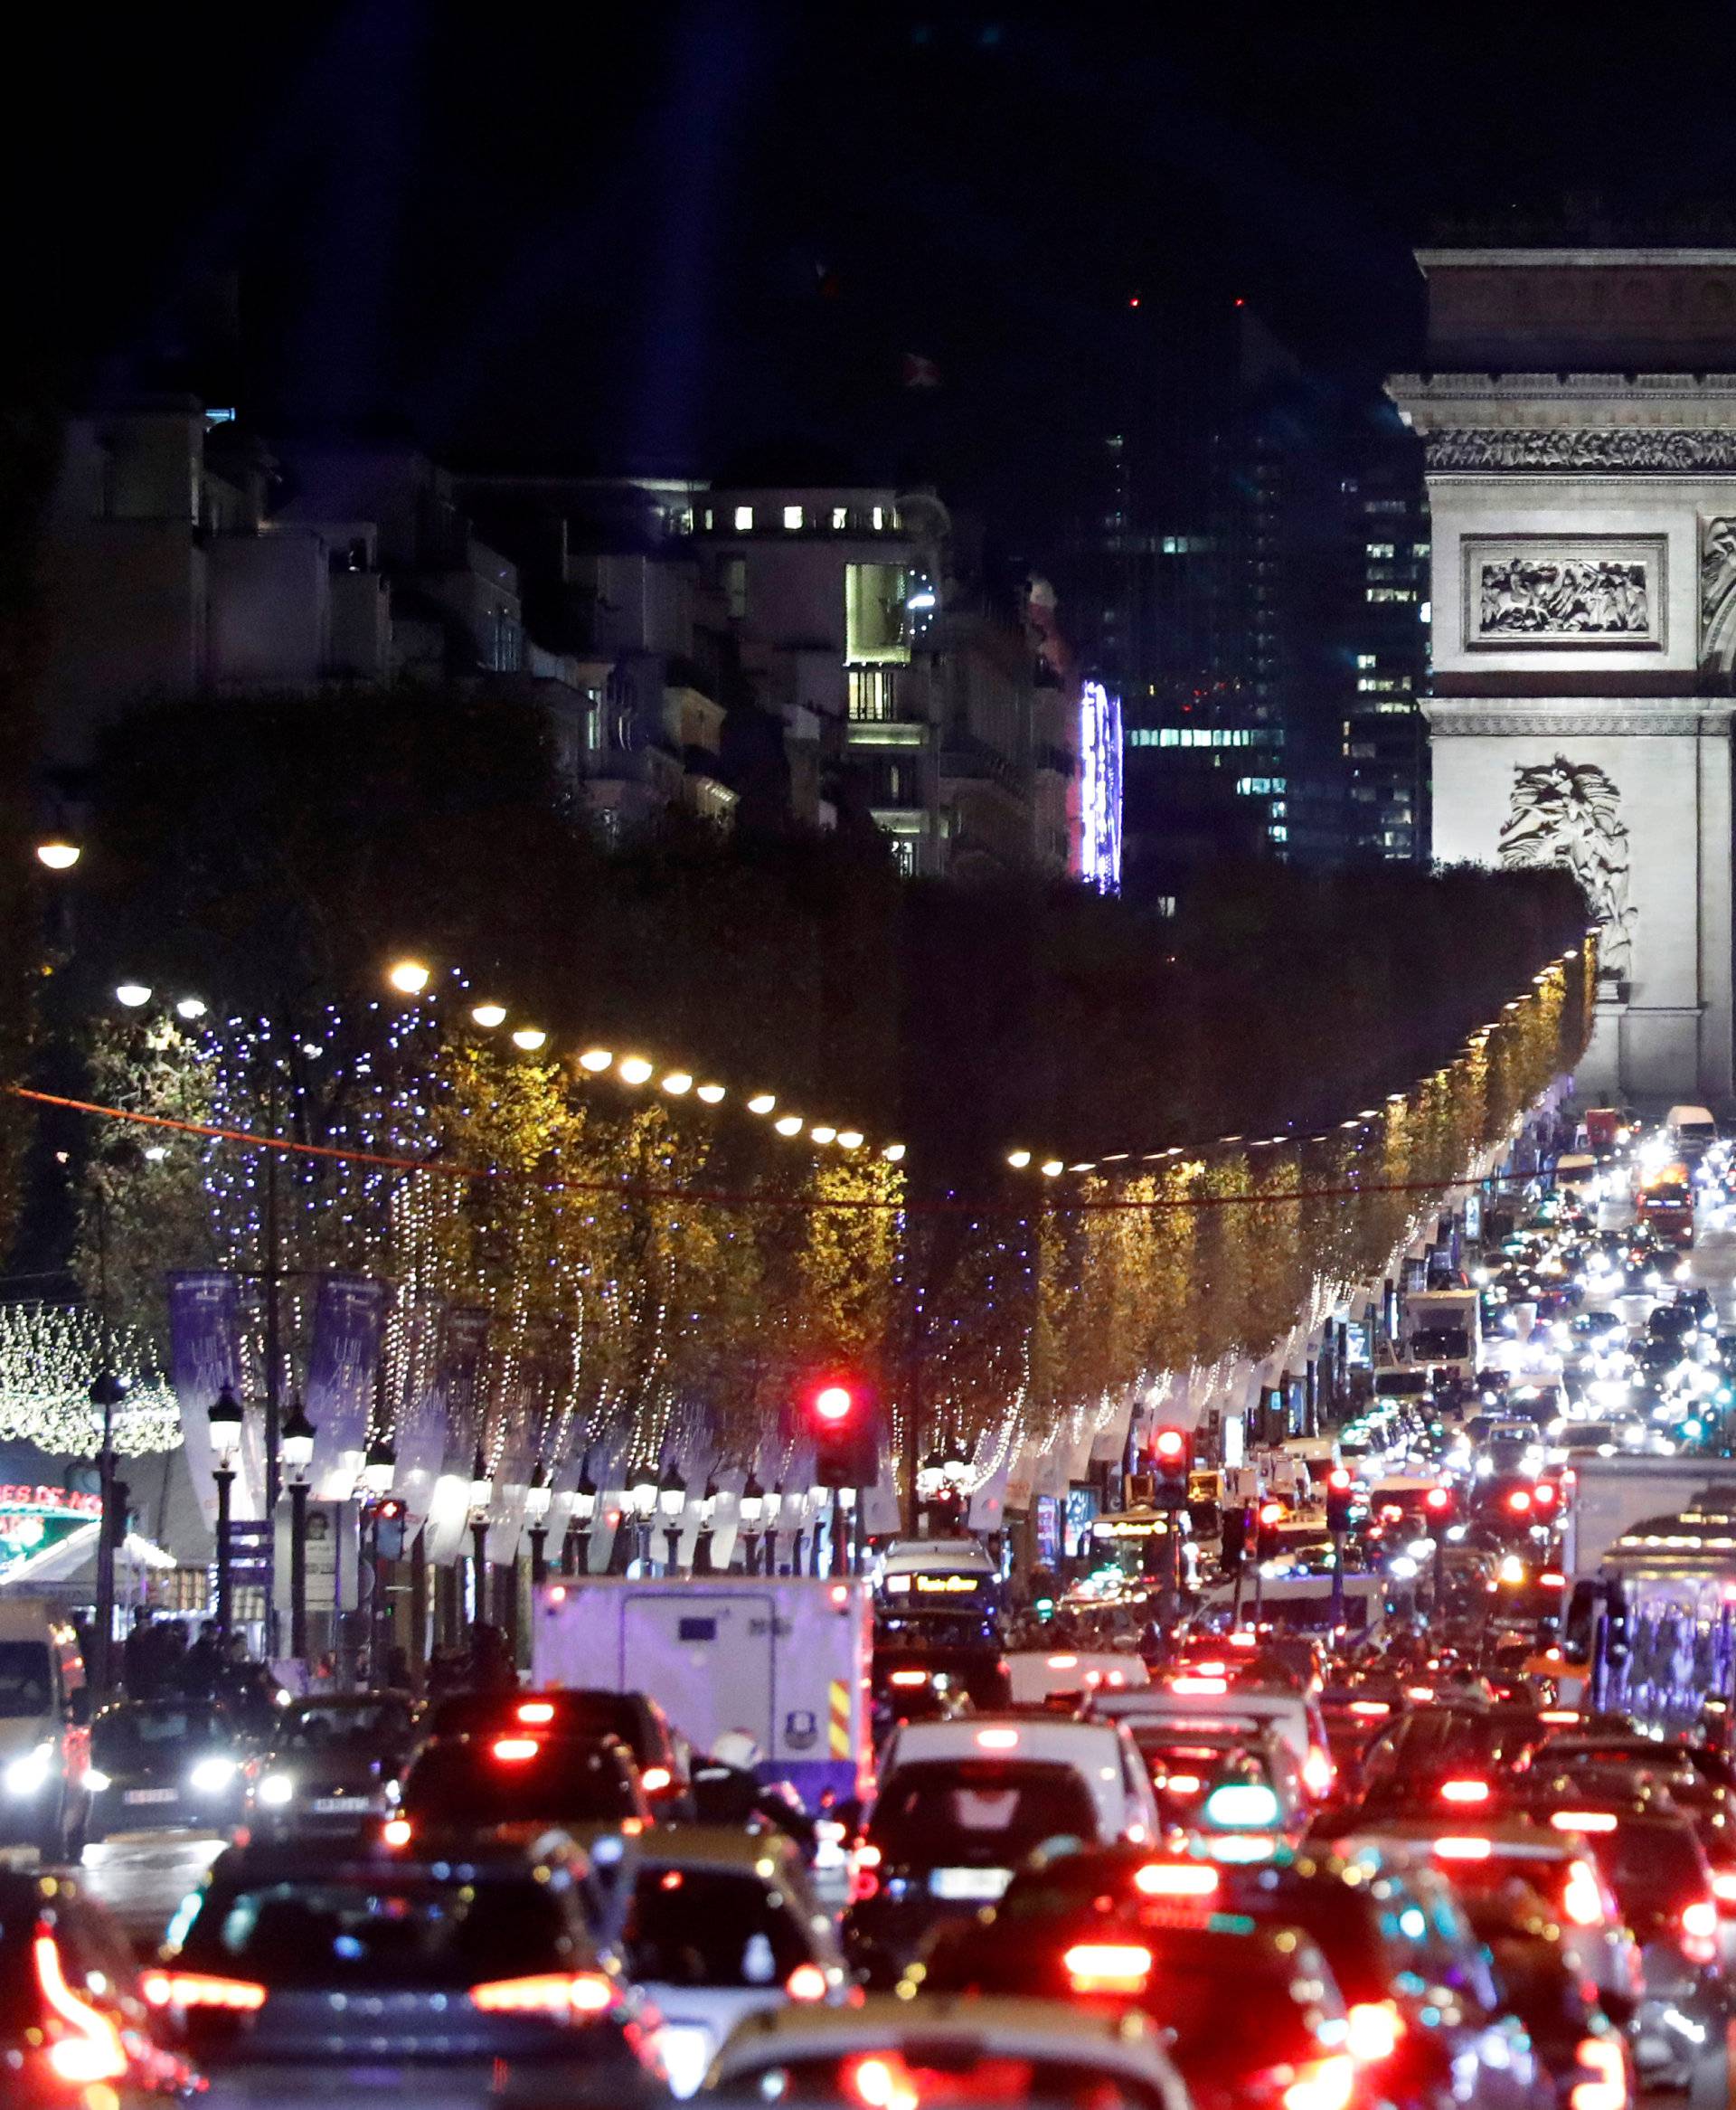 Christmas holiday lights hang from trees to illuminate the Champs Elysees avenue in Paris as rush hour traffic fills the avenue leading up to the Arc de Triomphe